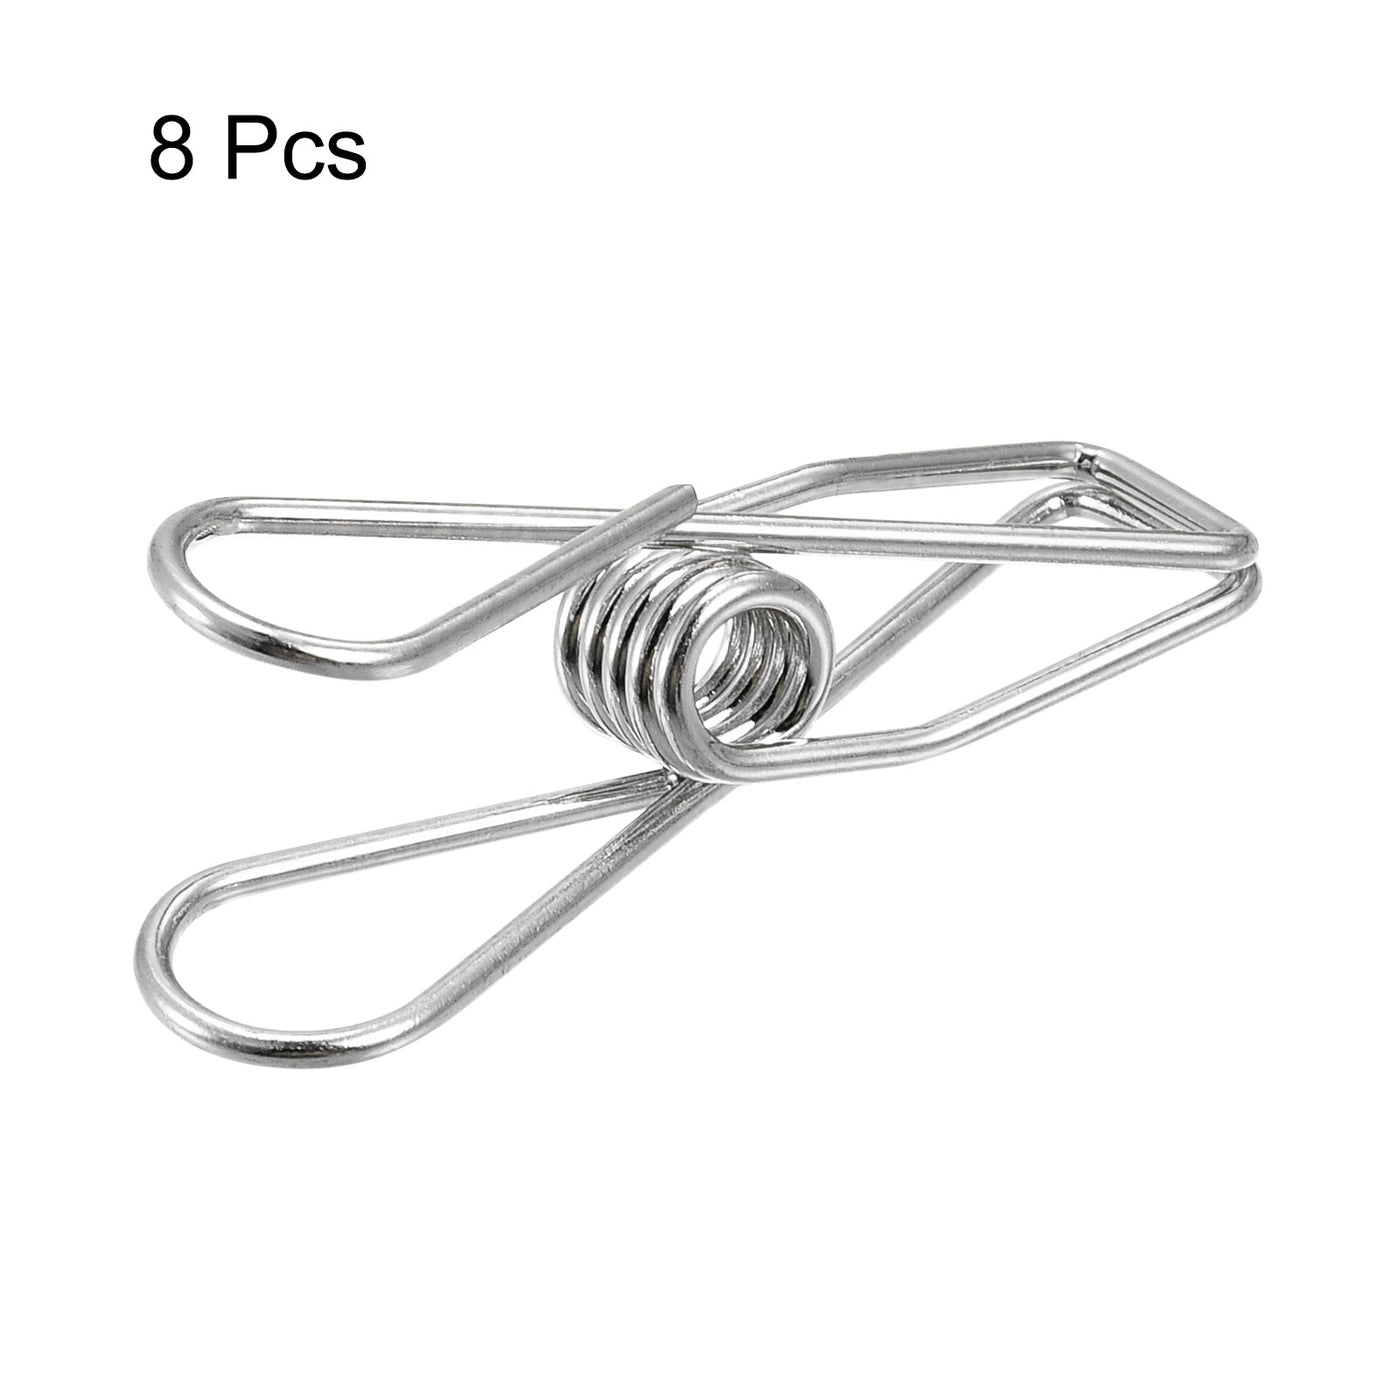 uxcell Uxcell Tablecloth Clips, 32mm Carbon Steel Clamps for Fixing Table Cloth, Silver 8 Pcs